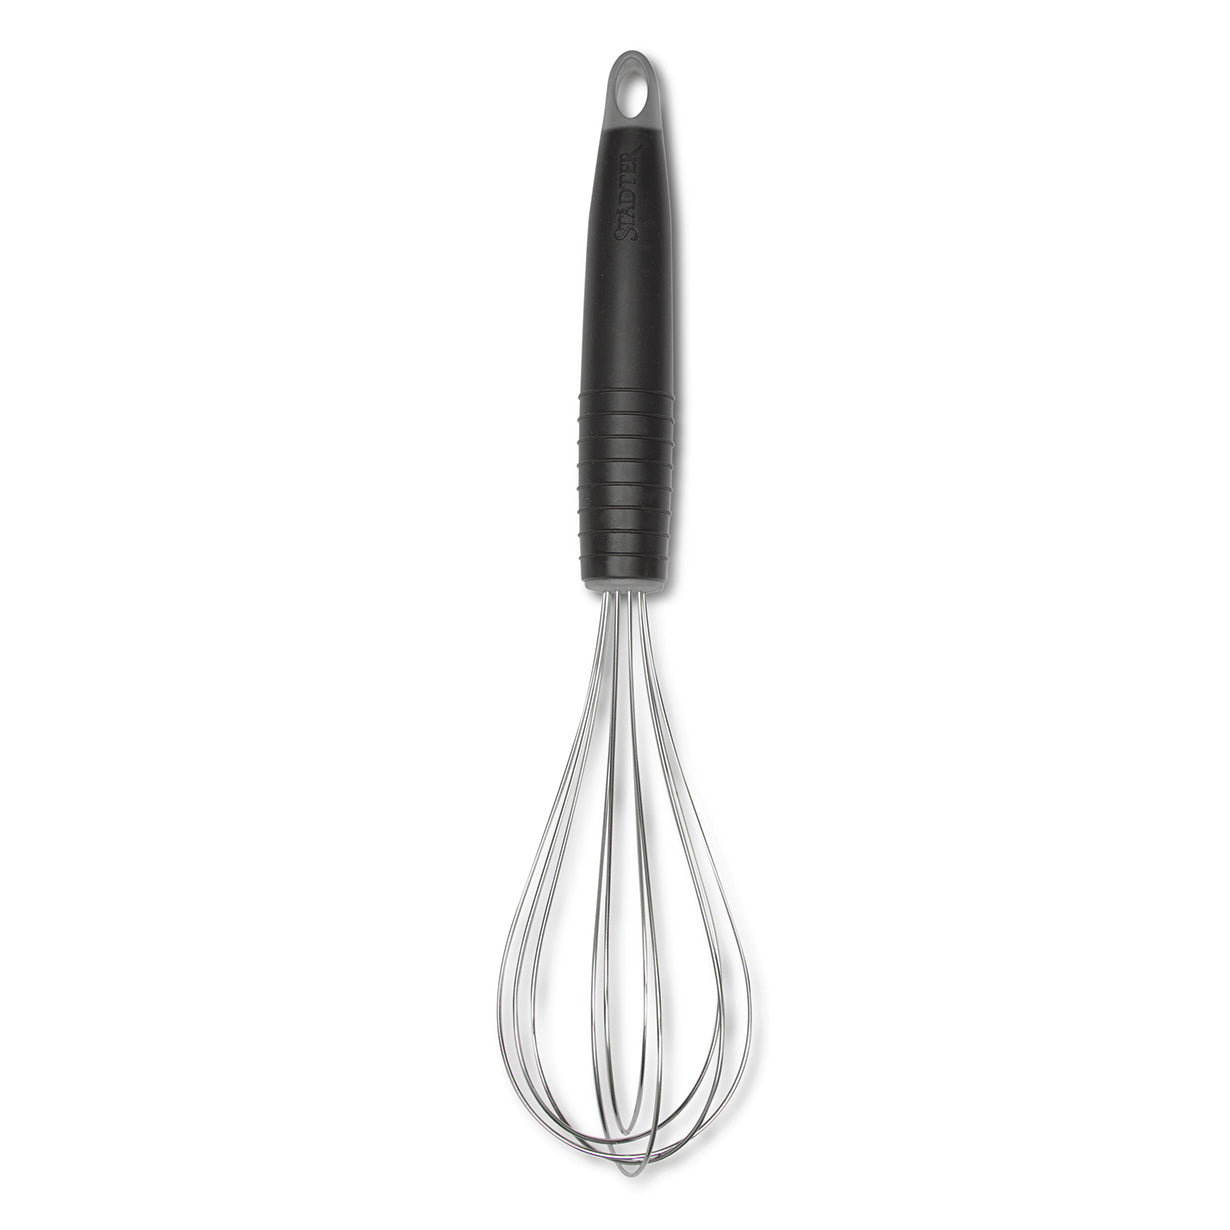 Soft 'n Style Metal Whisk